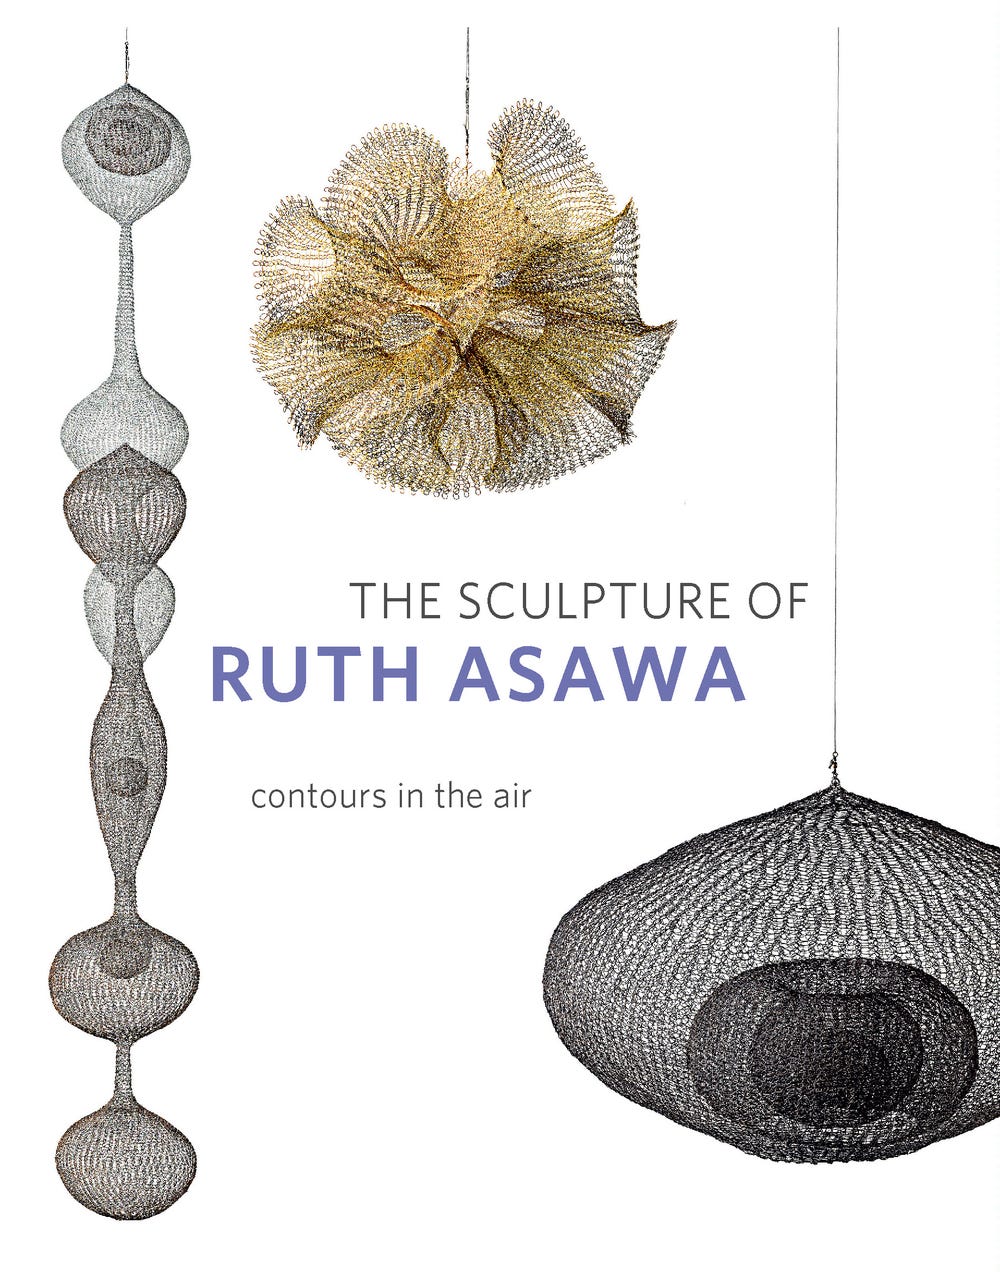 Book jacket featuring geometric sculptures with "The Sculpture of Ruth Asawa" text